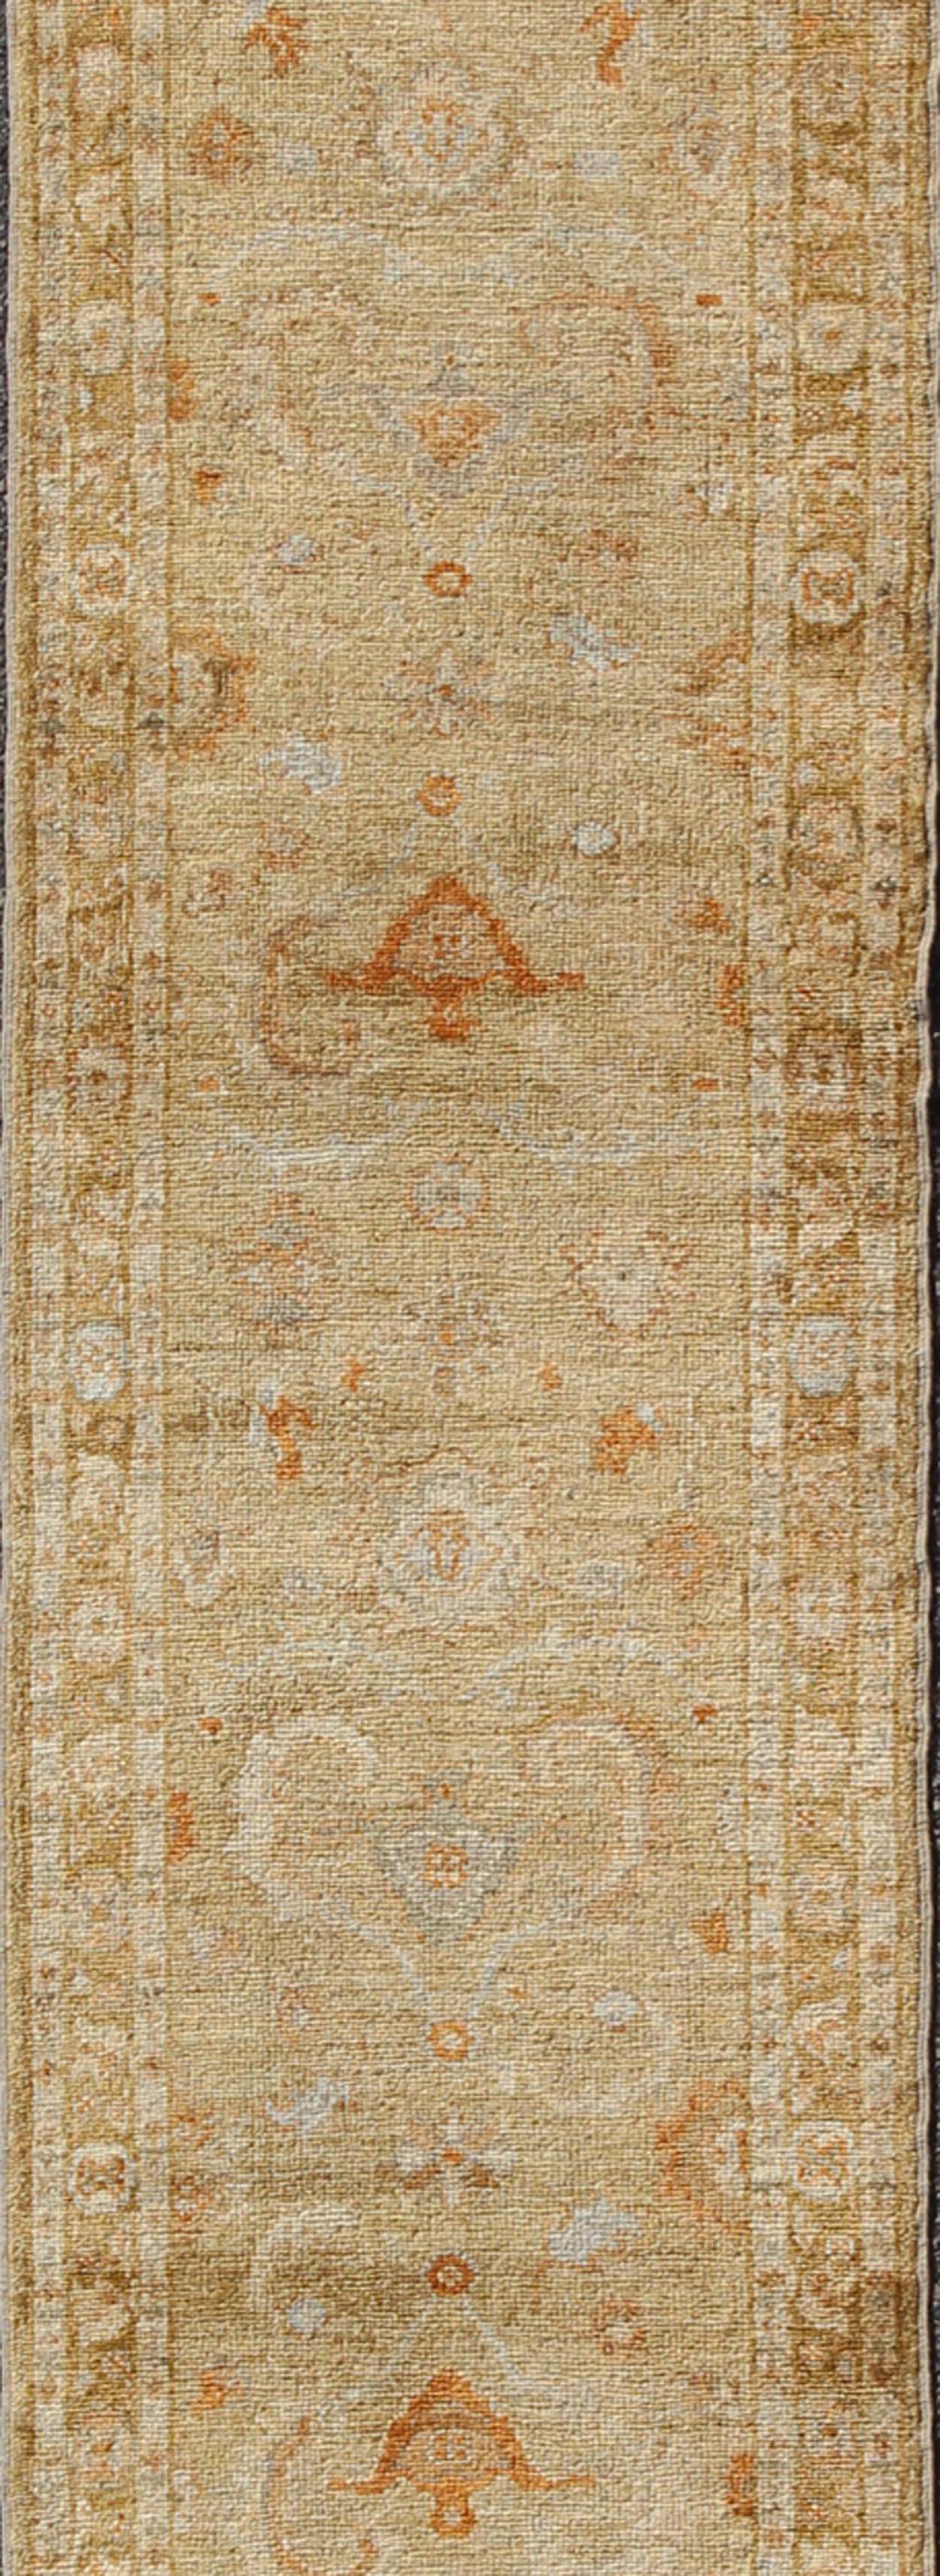 Turkish Oushak Angora runner with classic motifs and Transitional design, rug AN-97762, country of origin / type: Turkey / Oushak.

This Angora Oushak runner from Turkey features a unique golden color background, green, rust red, light blue and